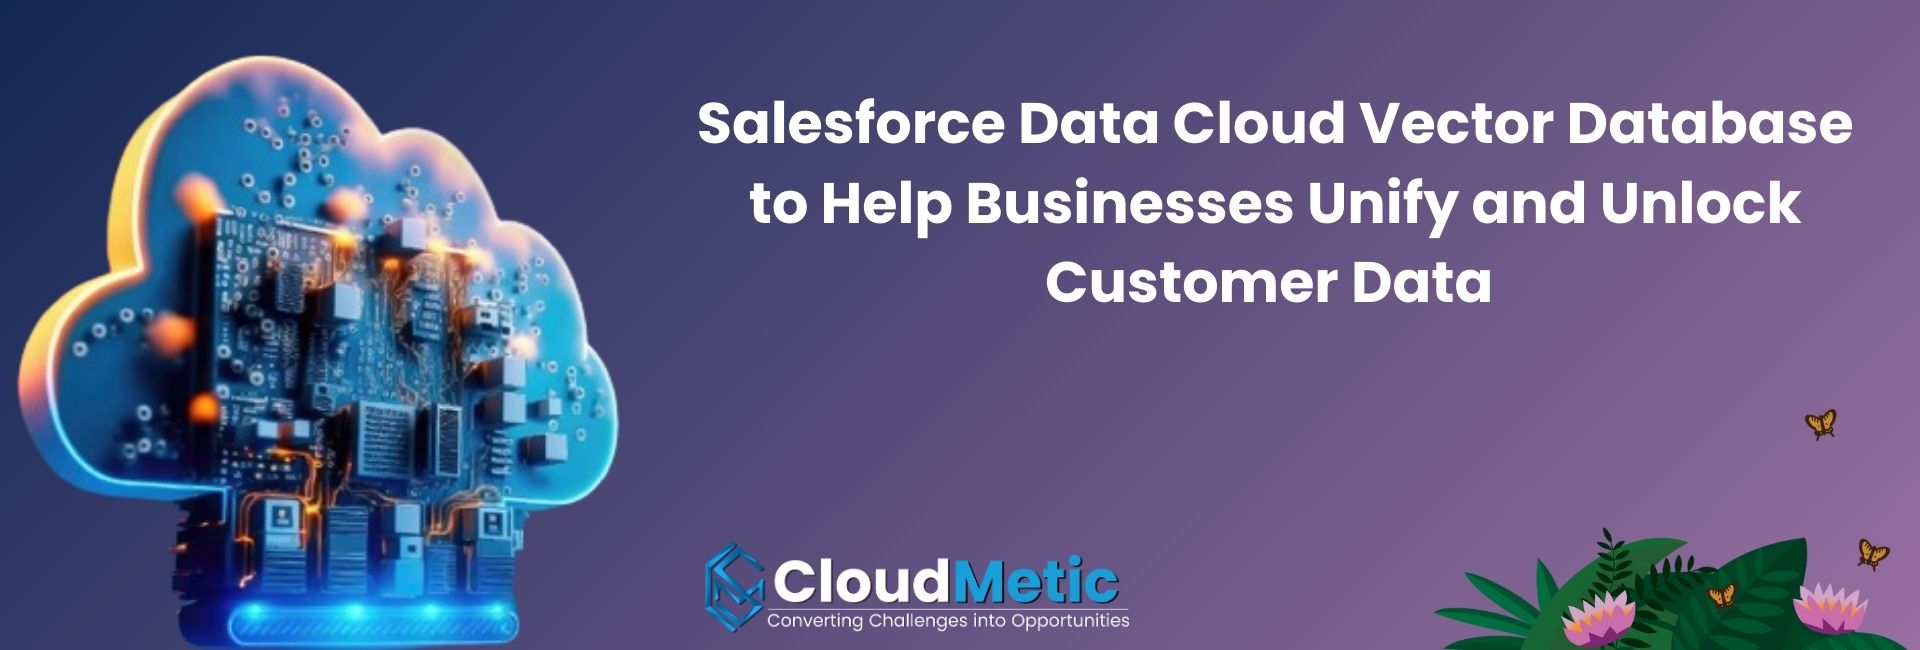 Salesforce Data Cloud Vector Database to Help Businesses Unify and Unlock Customer Data